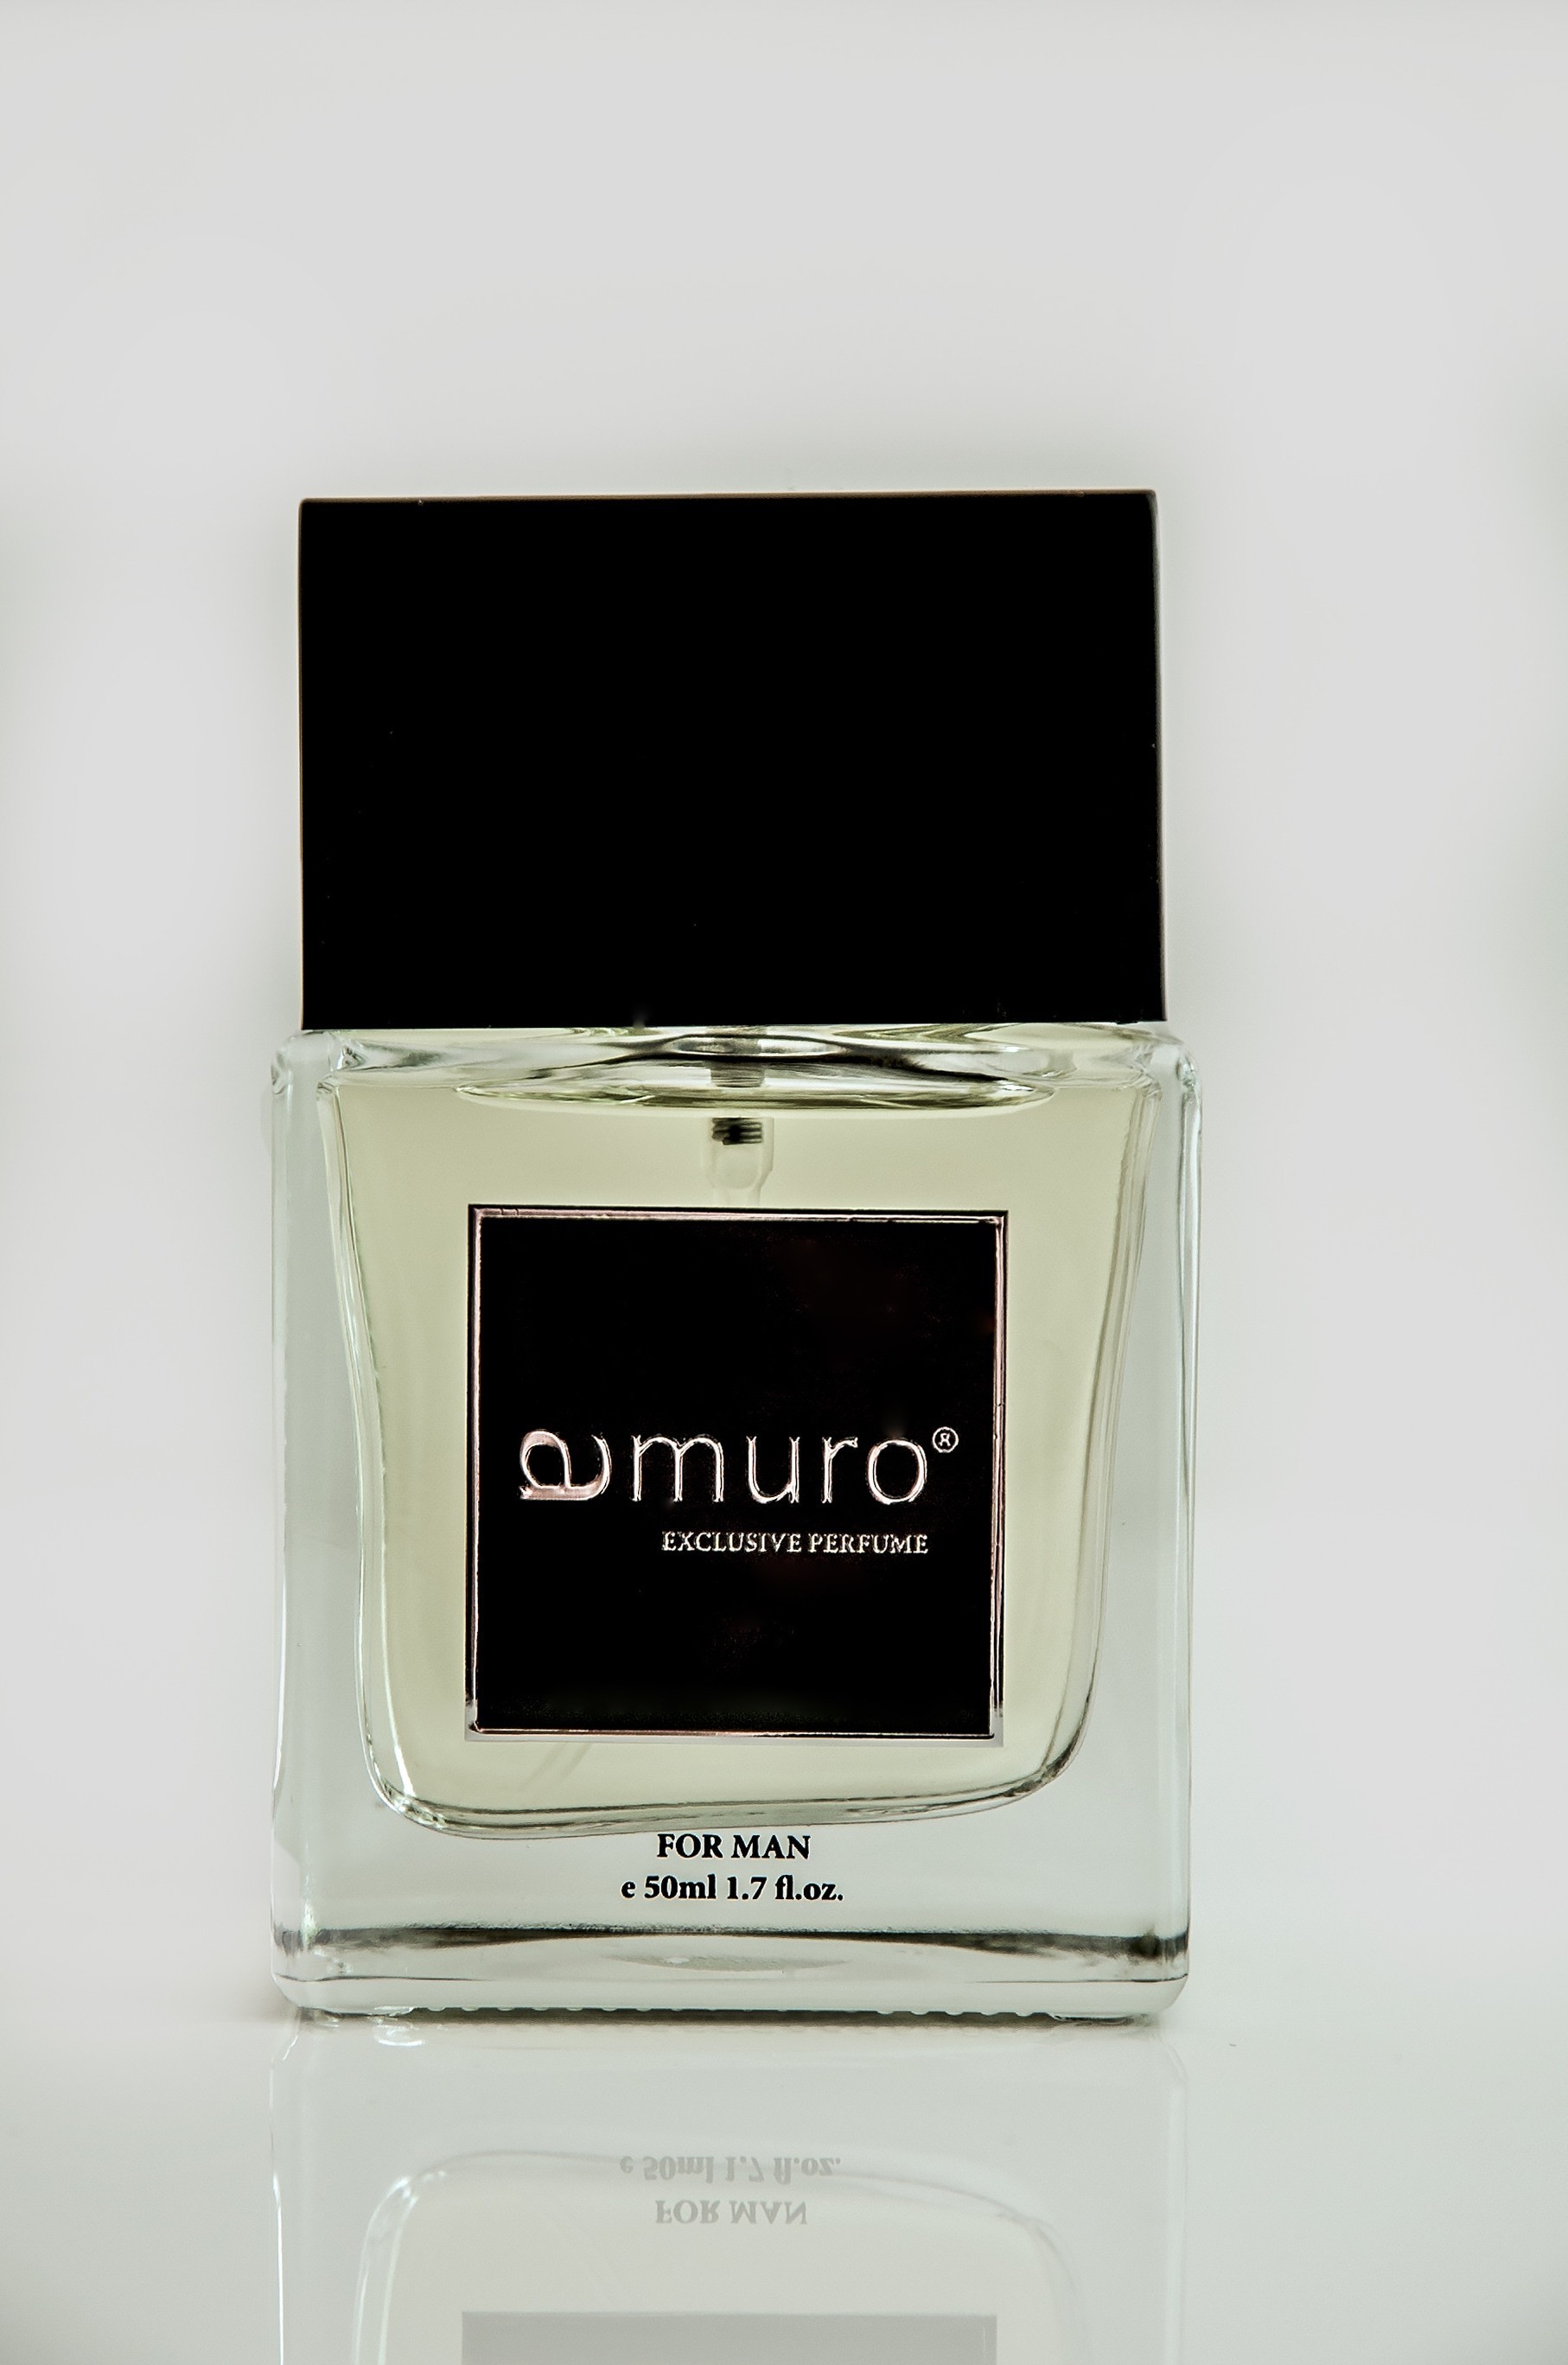 50 ml Exclusive Perfume for man Art: 516